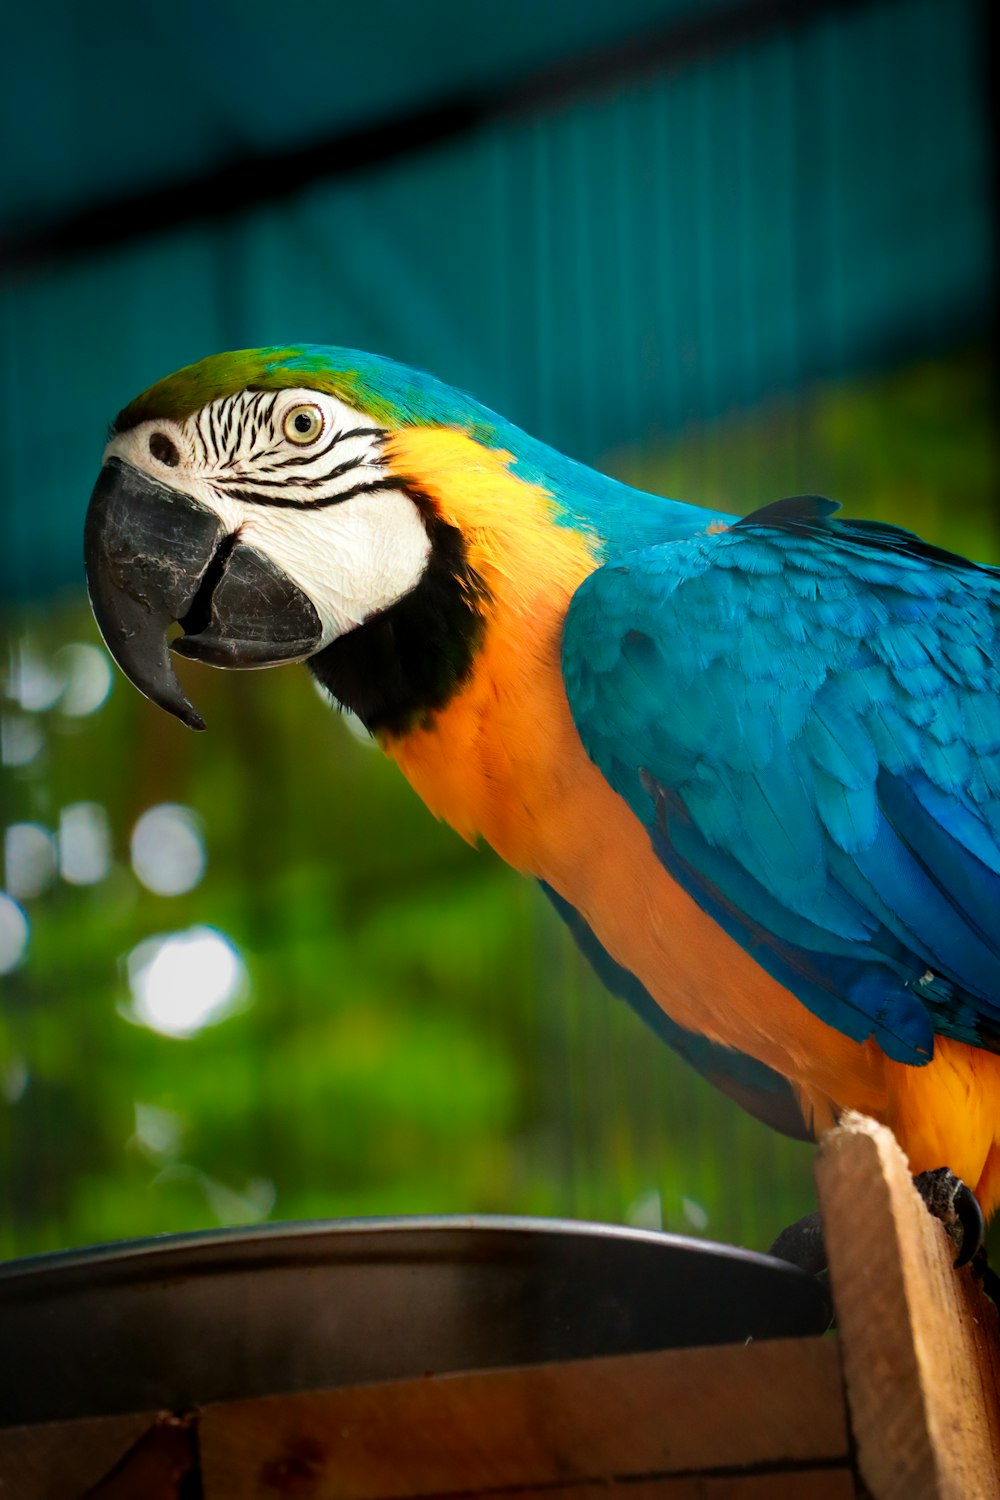 a colorful parrot perched on top of a wooden box